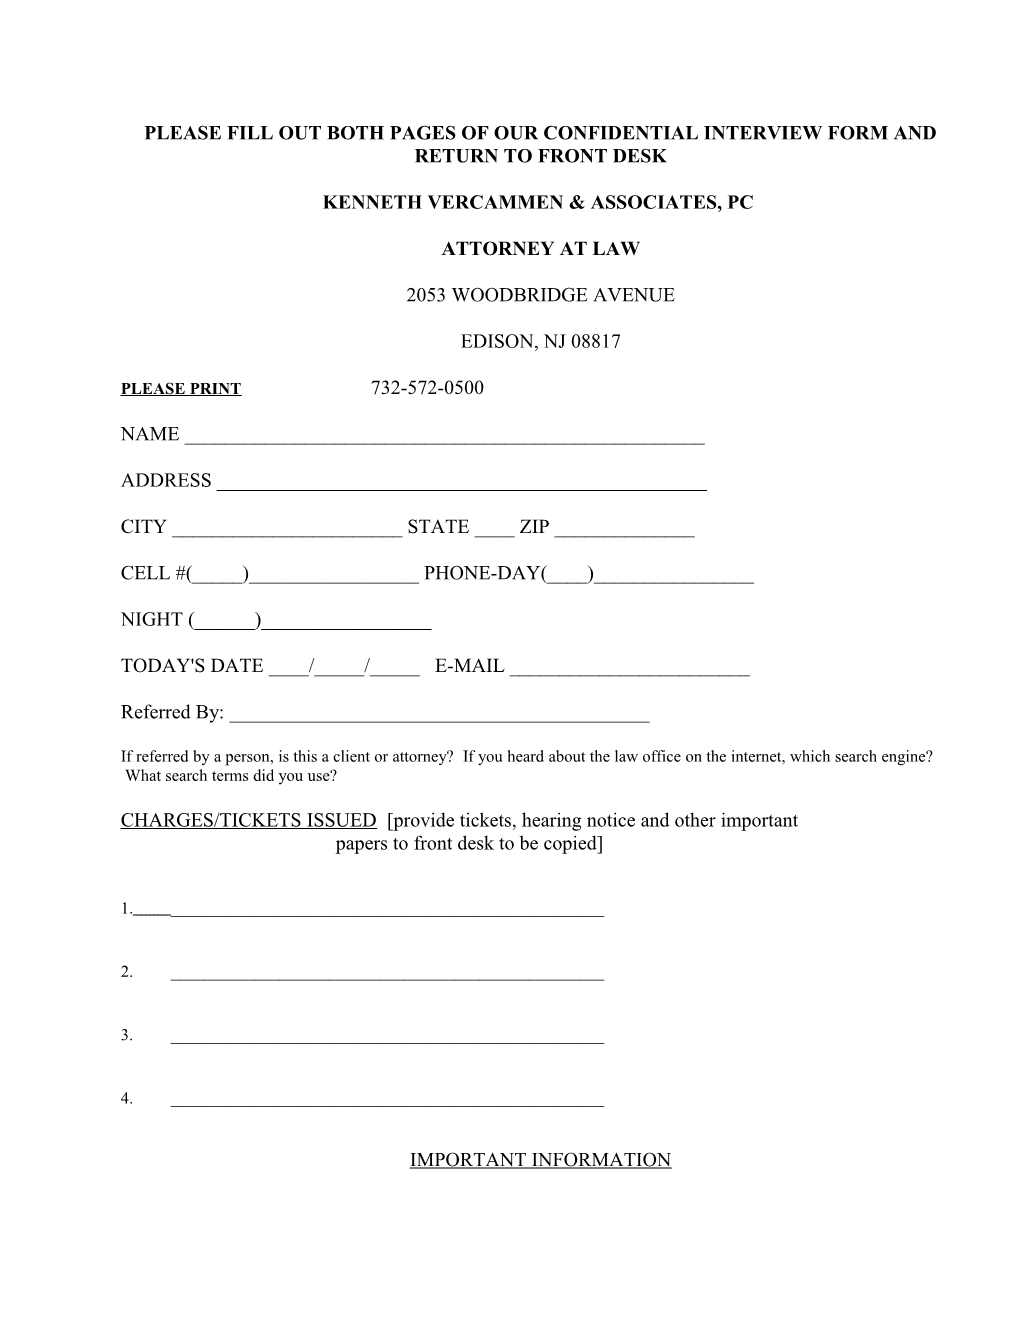 Please Fill out Both Pages of Our Confidential Interview Form and Return to Front Desk